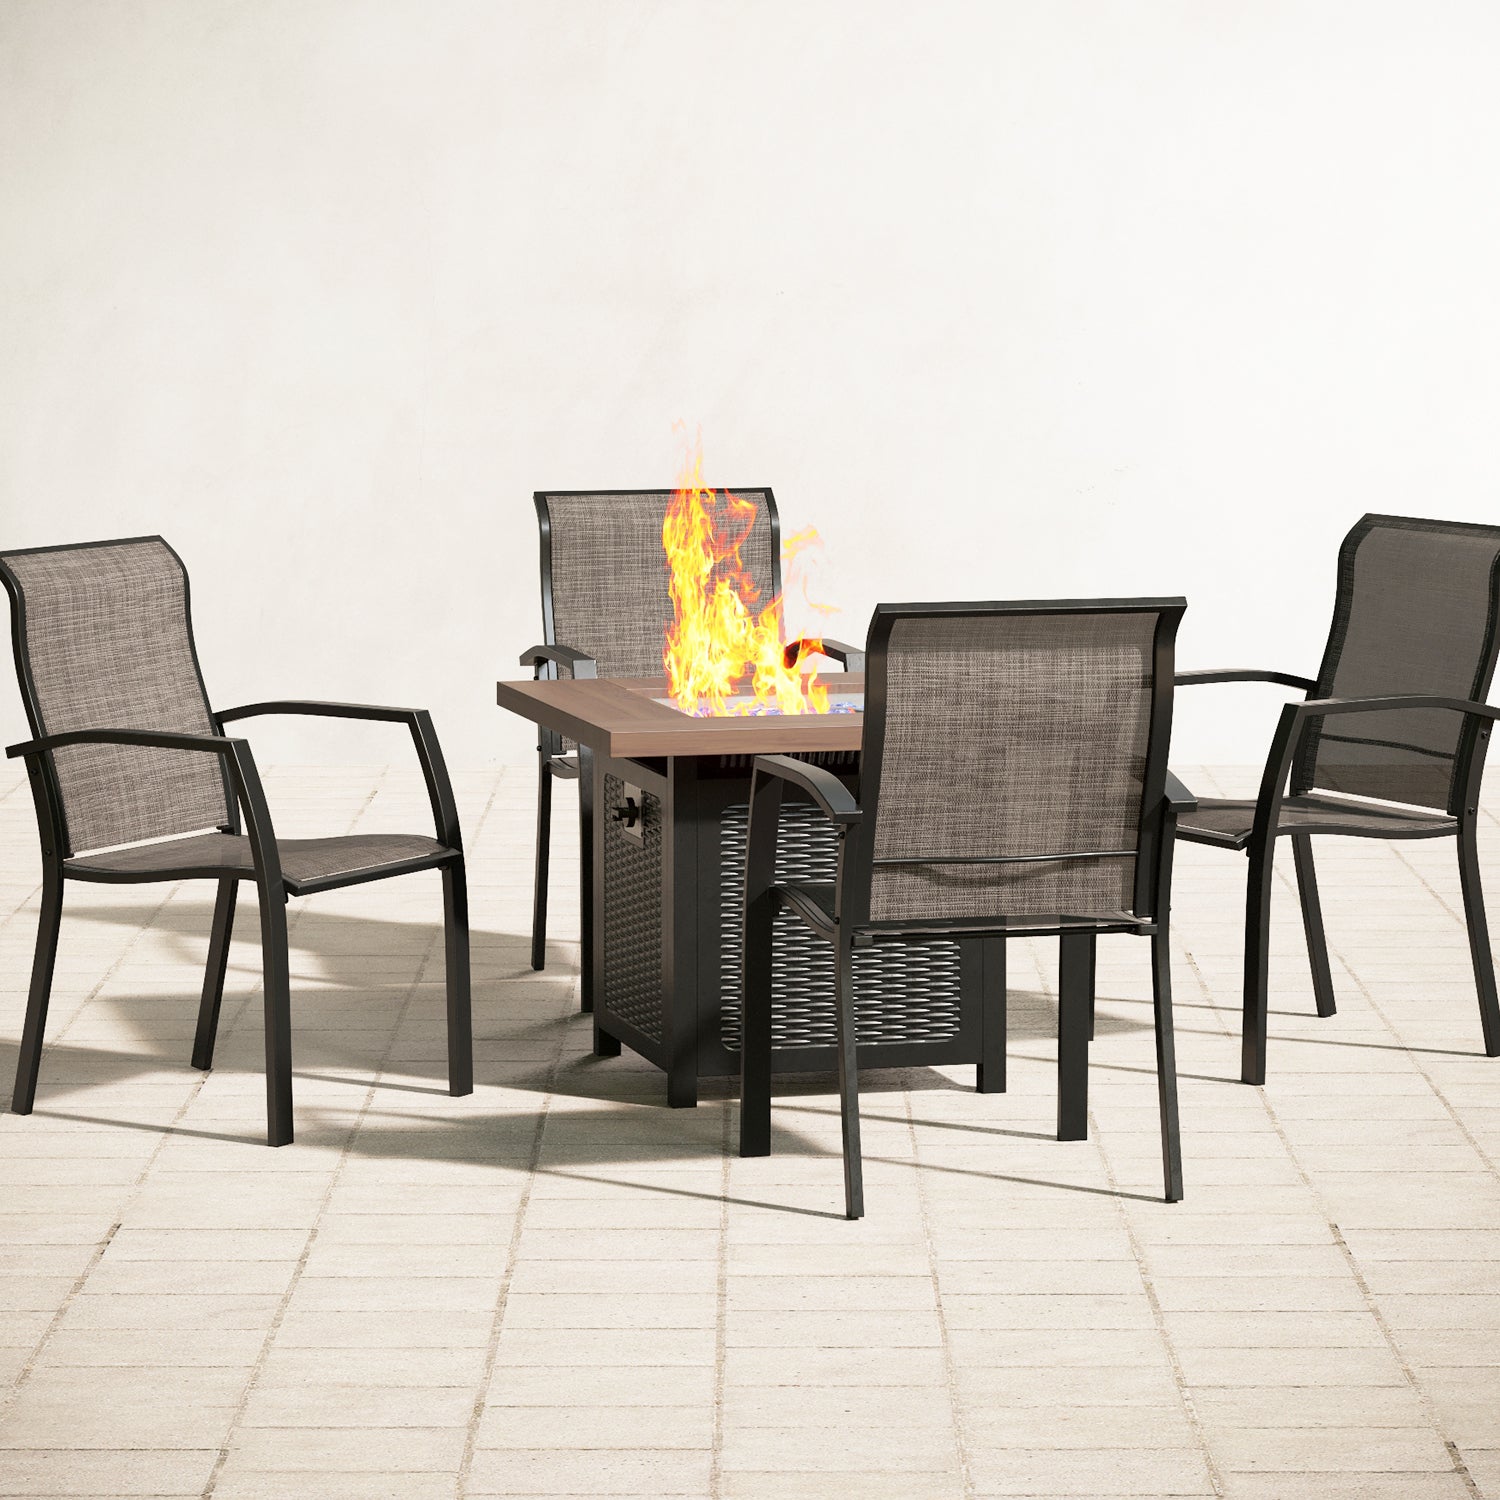 PHI VILLA 5-Piece 34" Wood-look Gas Fire Pit Table & Simple Aluminum Textilene Fixed Chairs Patio Dining Set